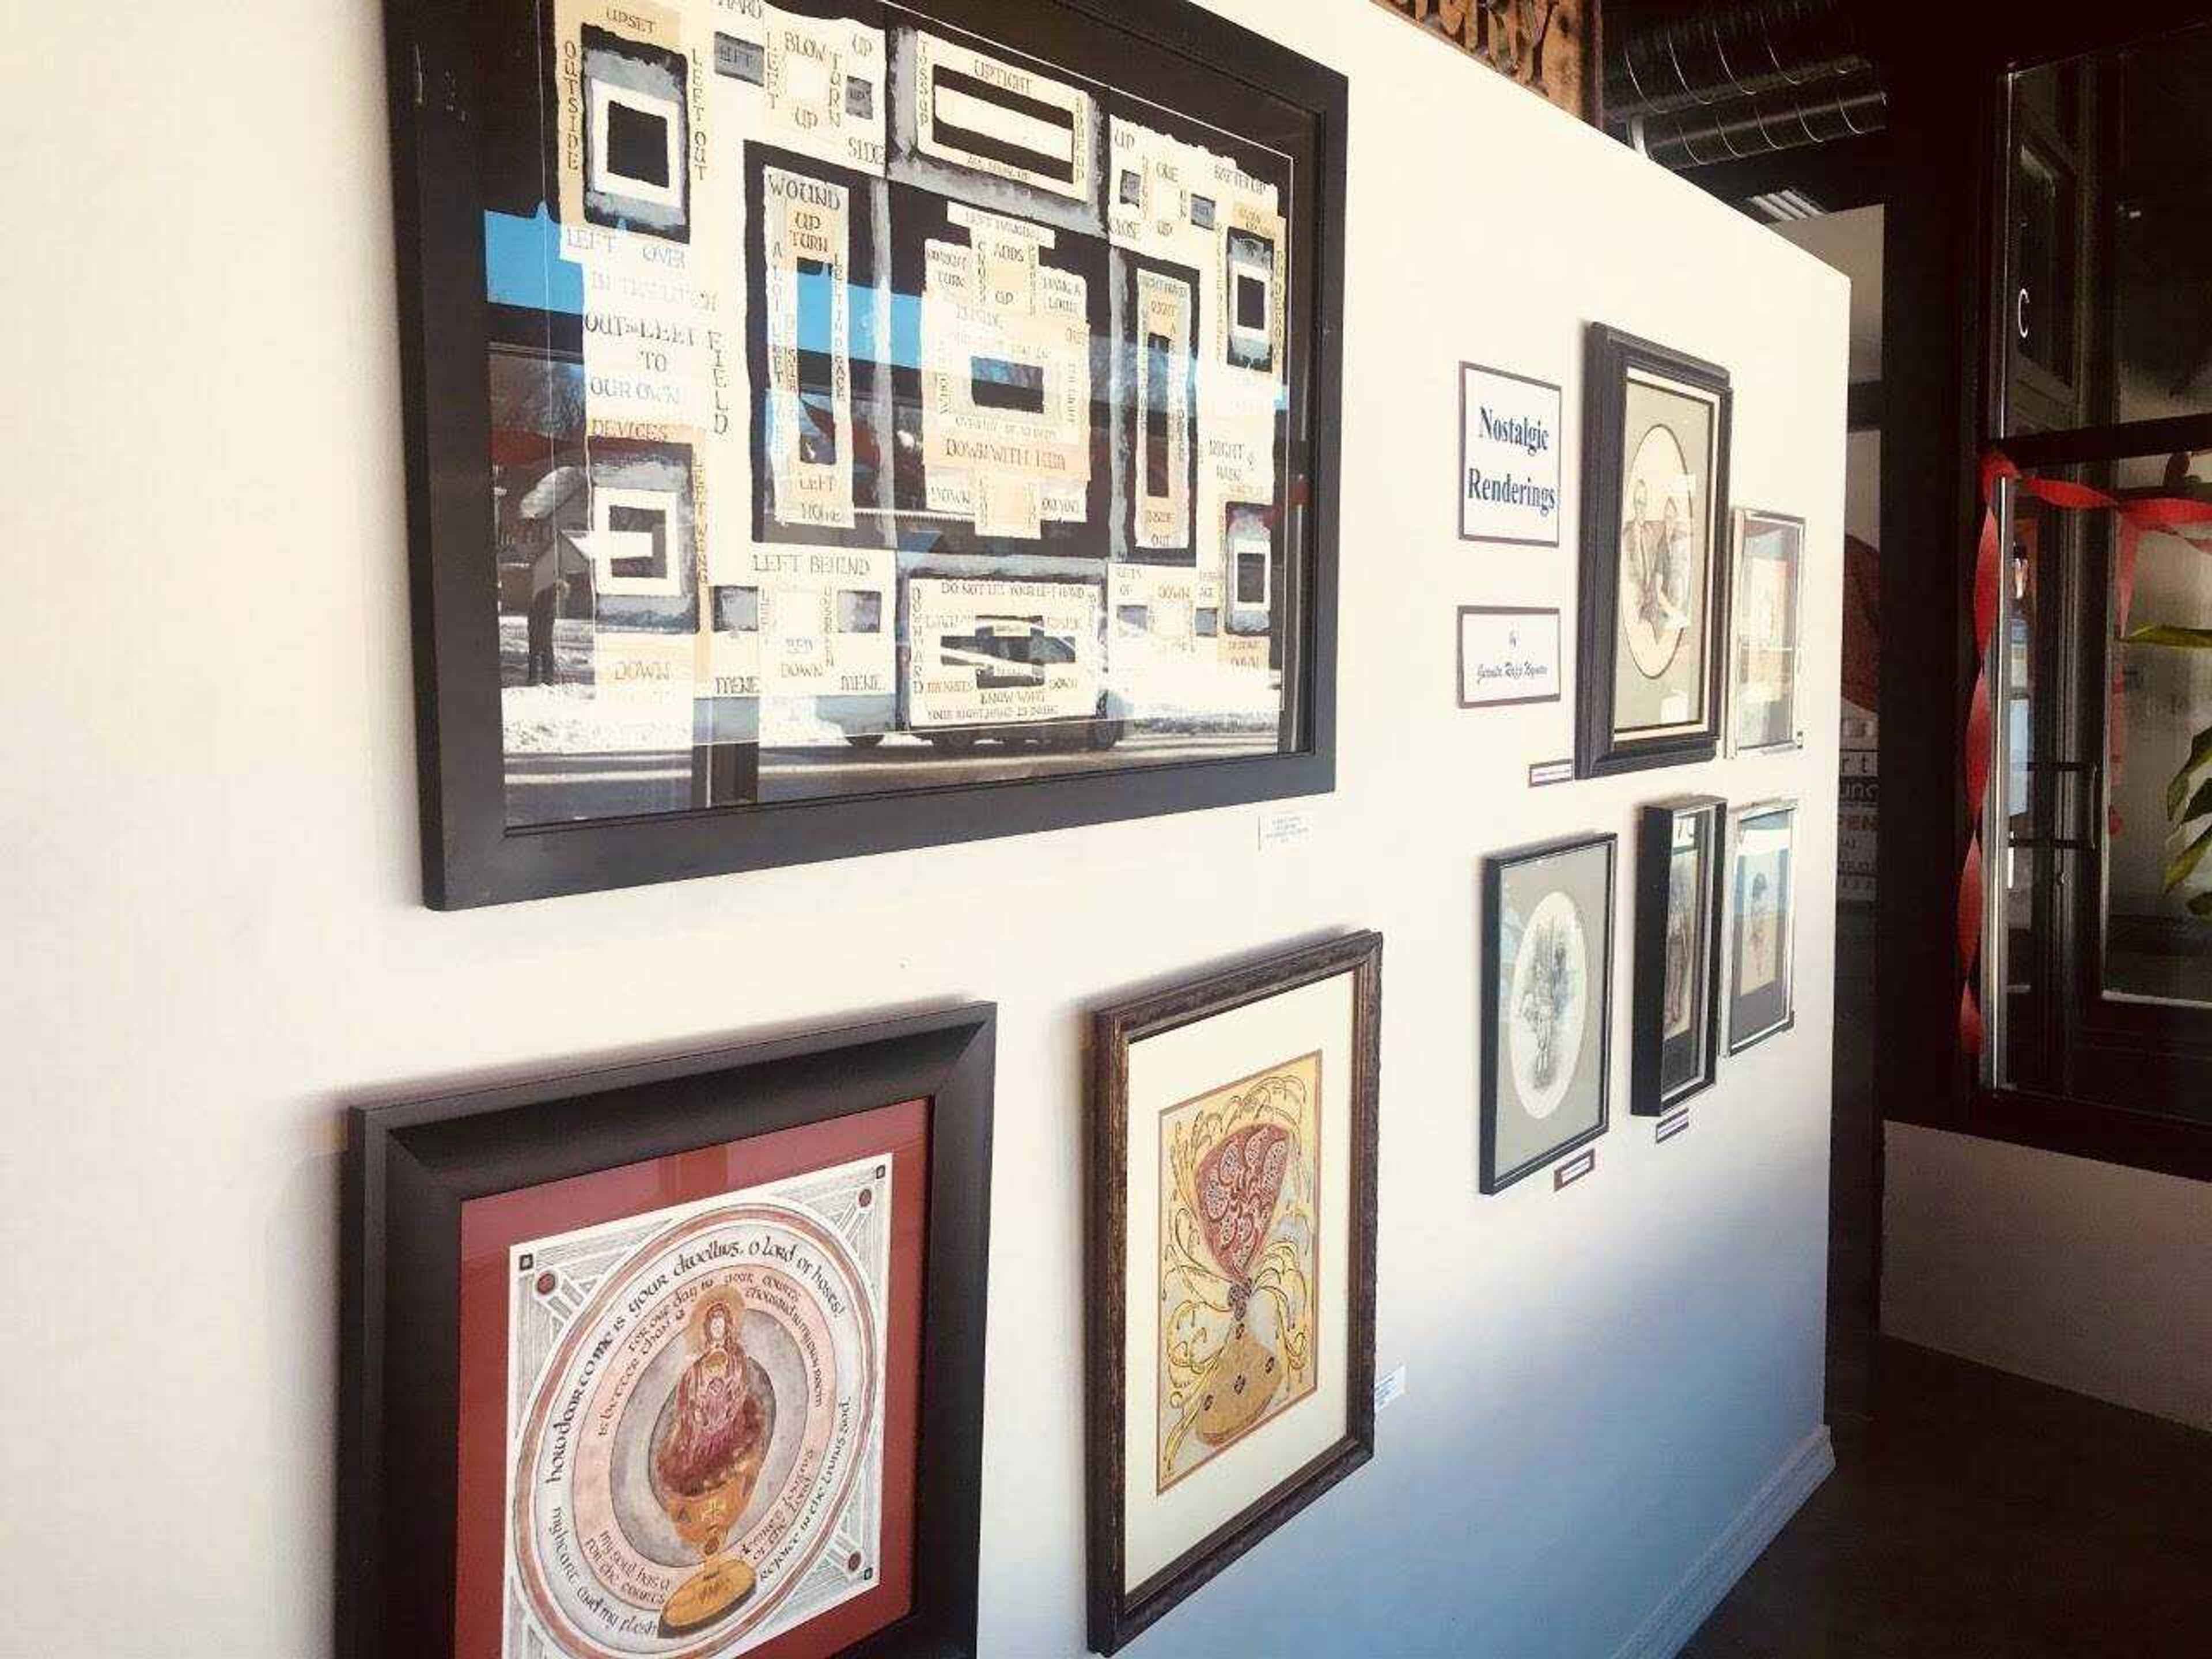 Robert Towner’s work is displayed in the Arts Council window in downtown Cape Girardeau. He is one of two artists with featured work in the month of February, both of whom have connections to Southeast Missouri State University.